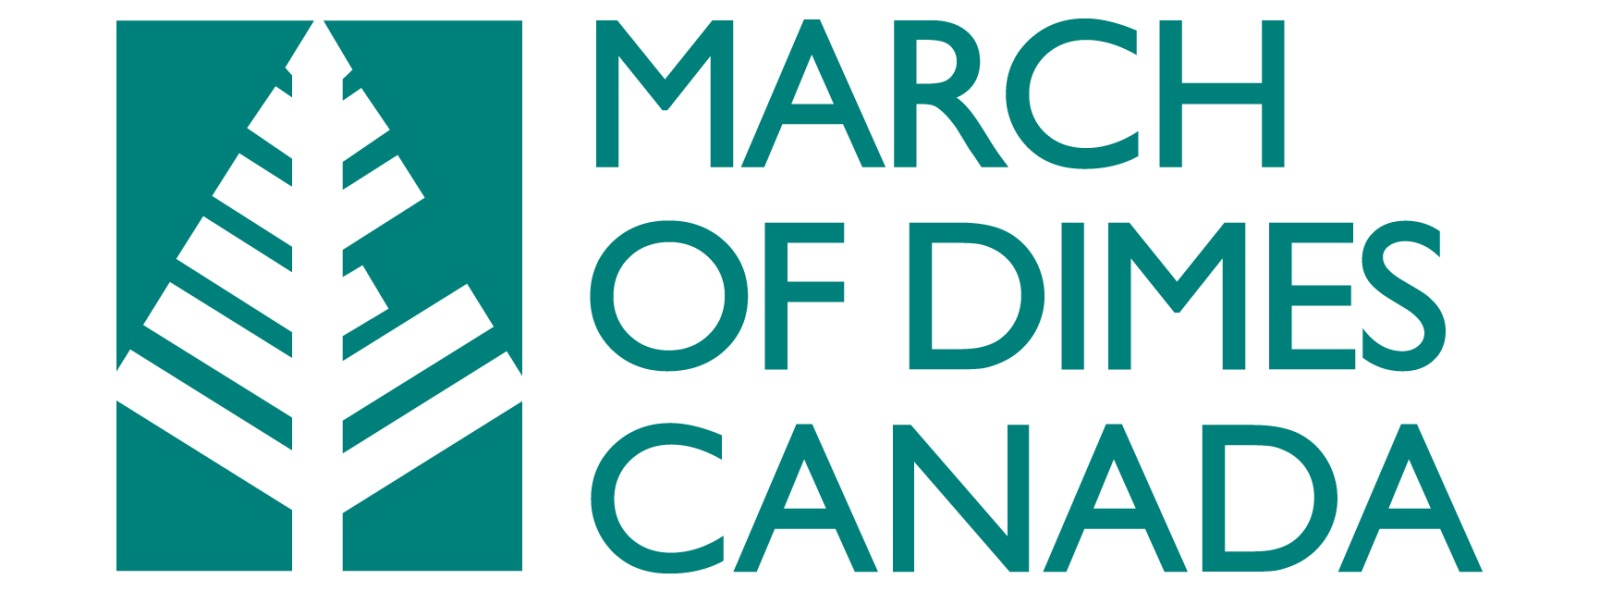 ALiGN Network - OTEC and March of Dimes Canada